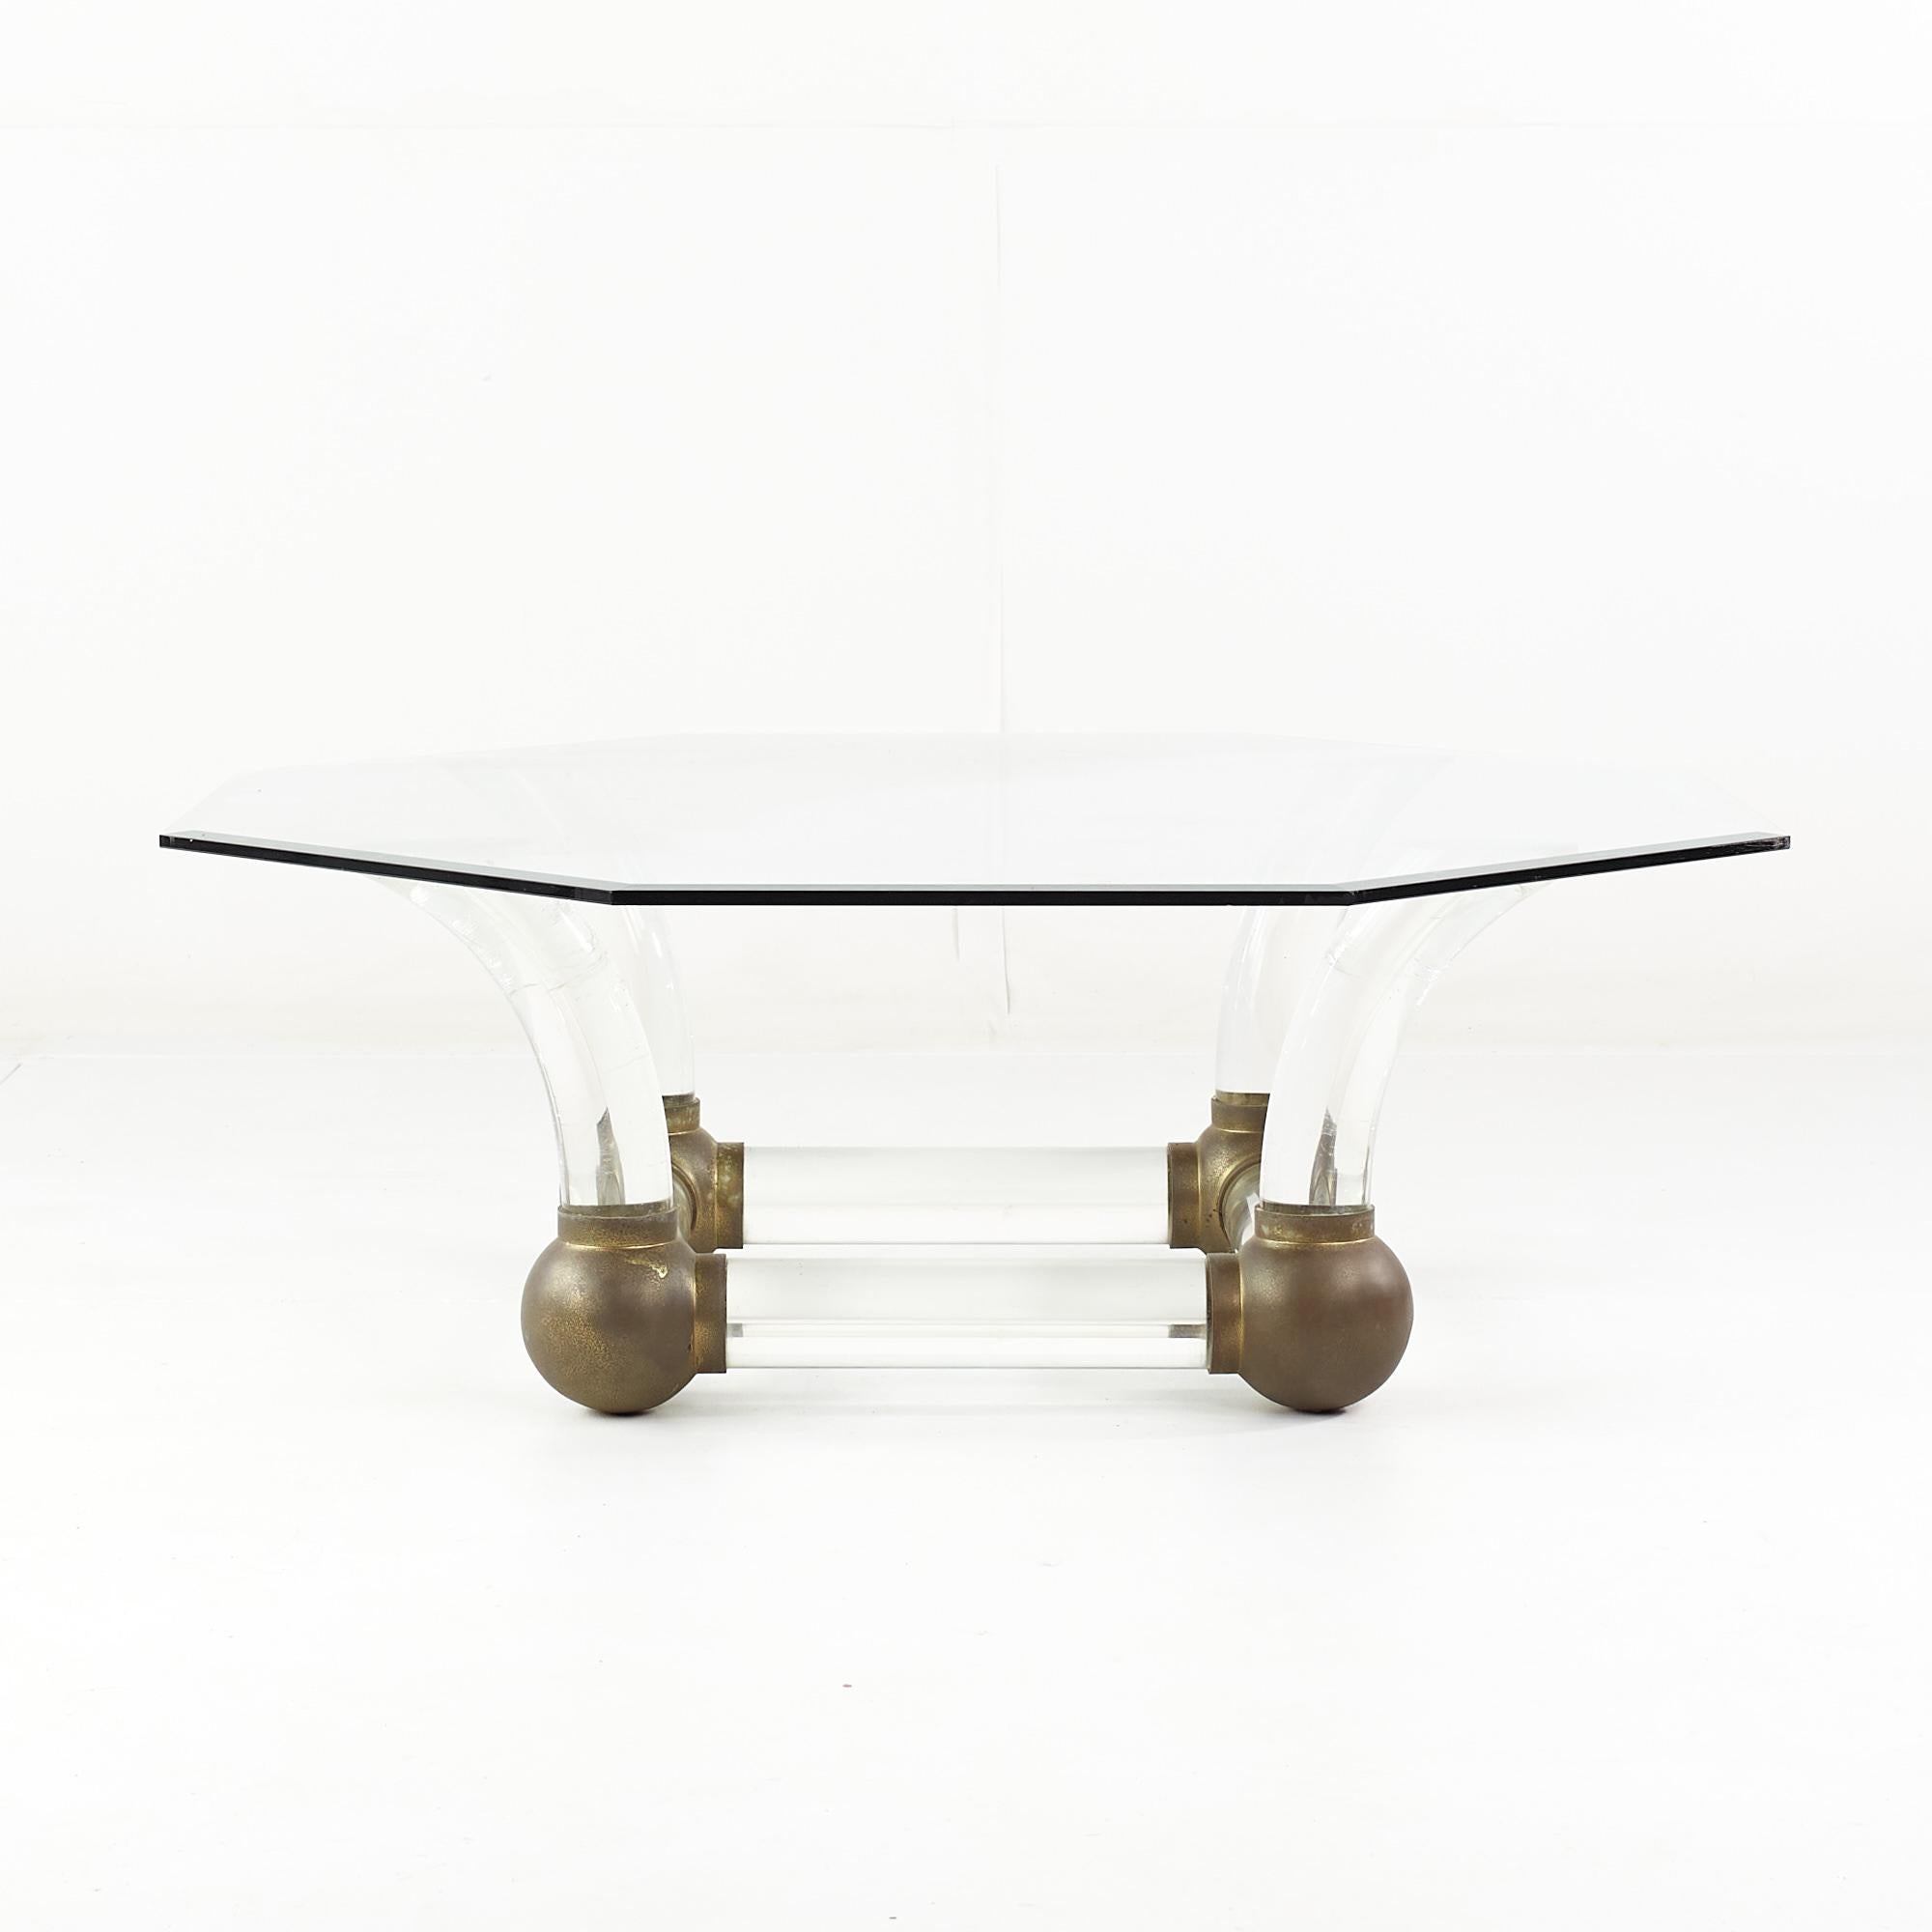 Mid century Lucite and brass tusk coffee table

This table measures: 44 wide x 44 deep x 15 inches high

All pieces of furniture can be had in what we call restored vintage condition. That means the piece is restored upon purchase so it’s free